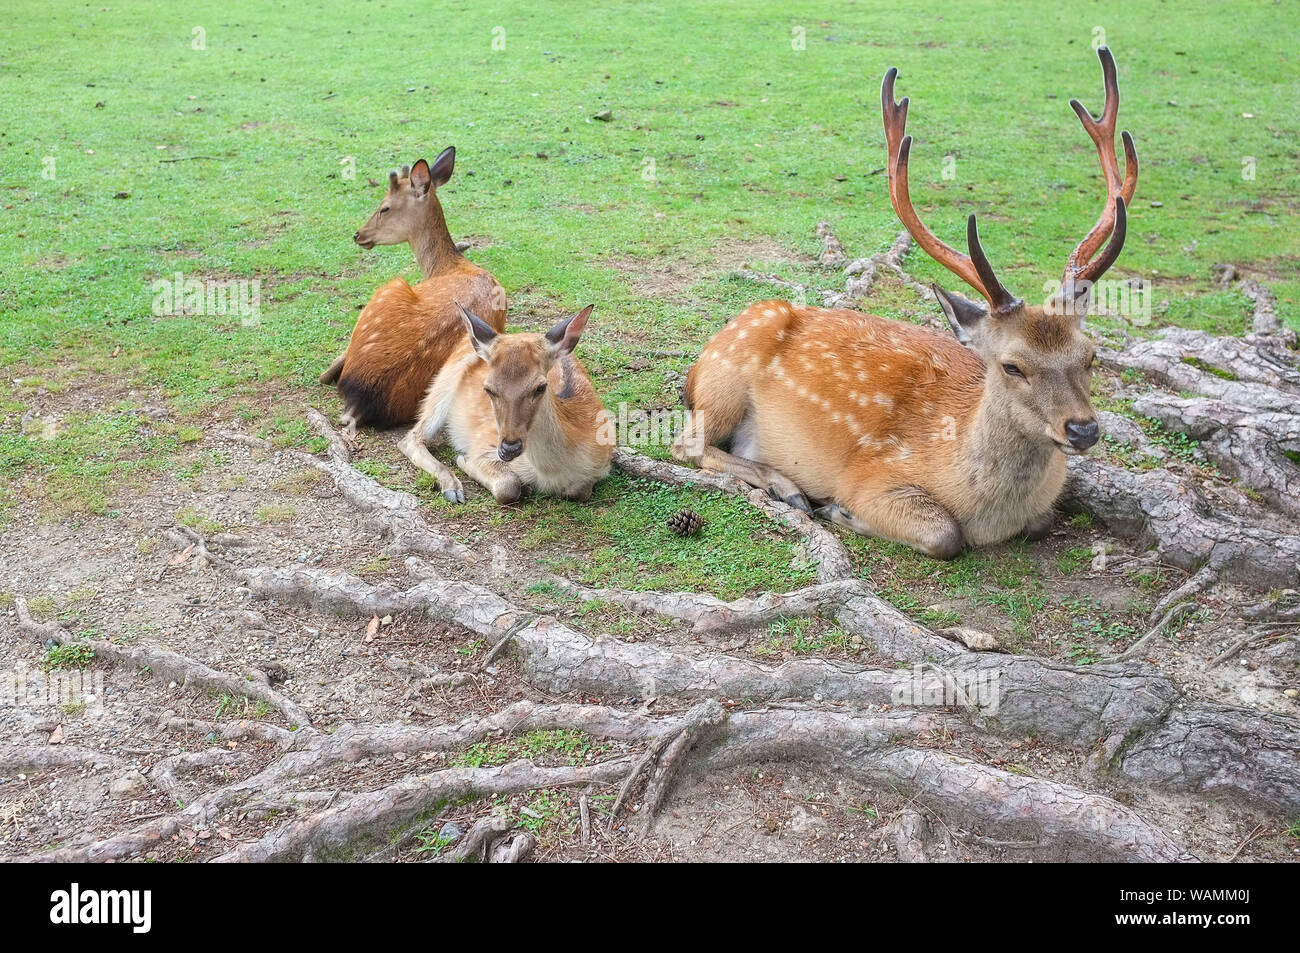 The sacred deer of Nara, Nara-Shi in Japan. The deer are sika deer (Cervus nippon) also known as the spotted deer or the Japanese deer. Stock Photo